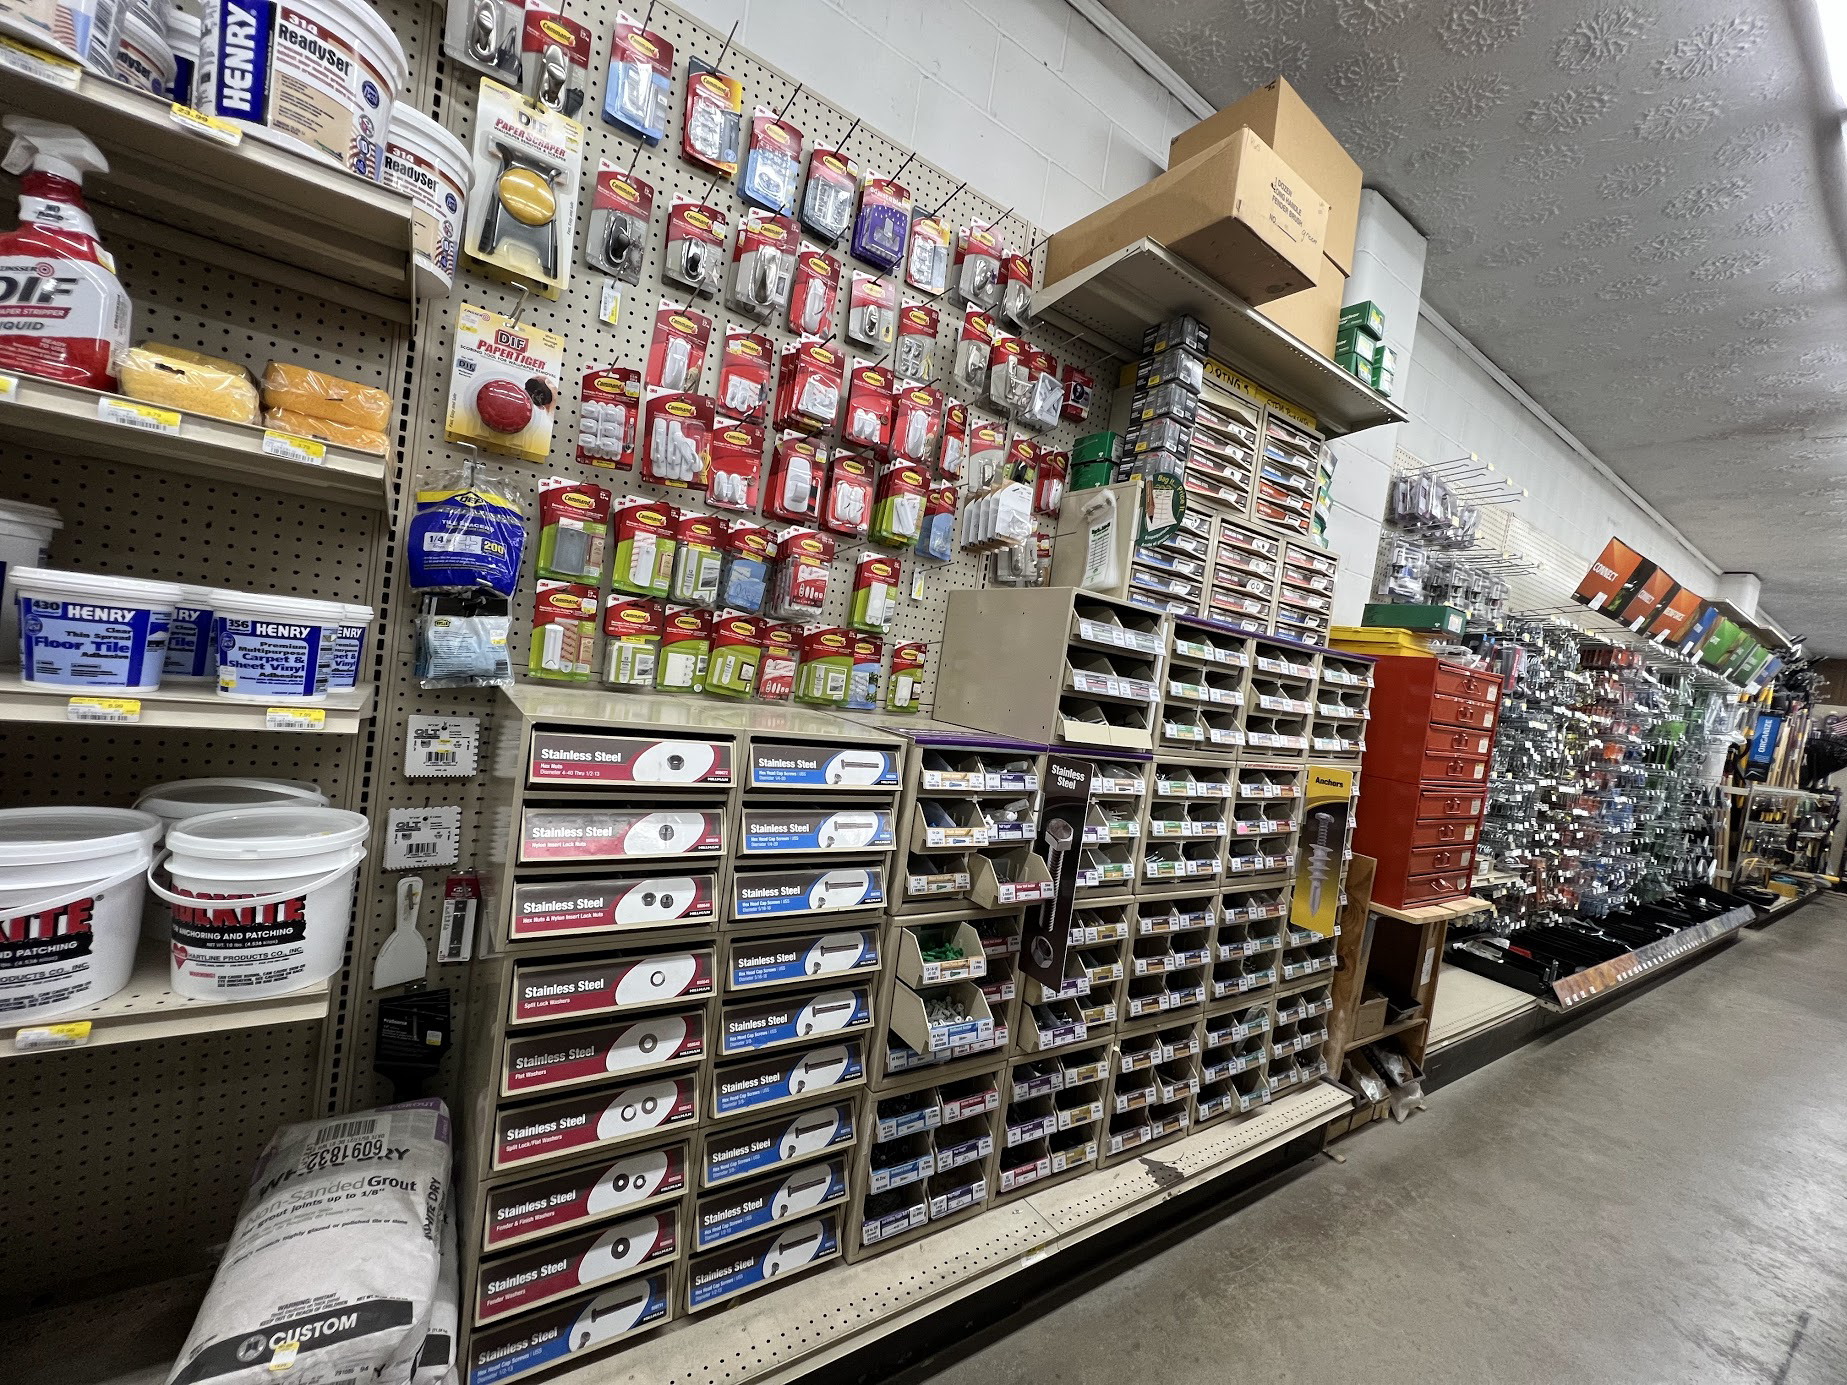 Ideal Supplies has a full supply of Brackets, fasteners, command strips, furniture pads, dowel, shelving, rods, and adhesives, hardware, tools, household,brackets, fasteners, command strips, furniture pads, dowel shelving rods, adhesives